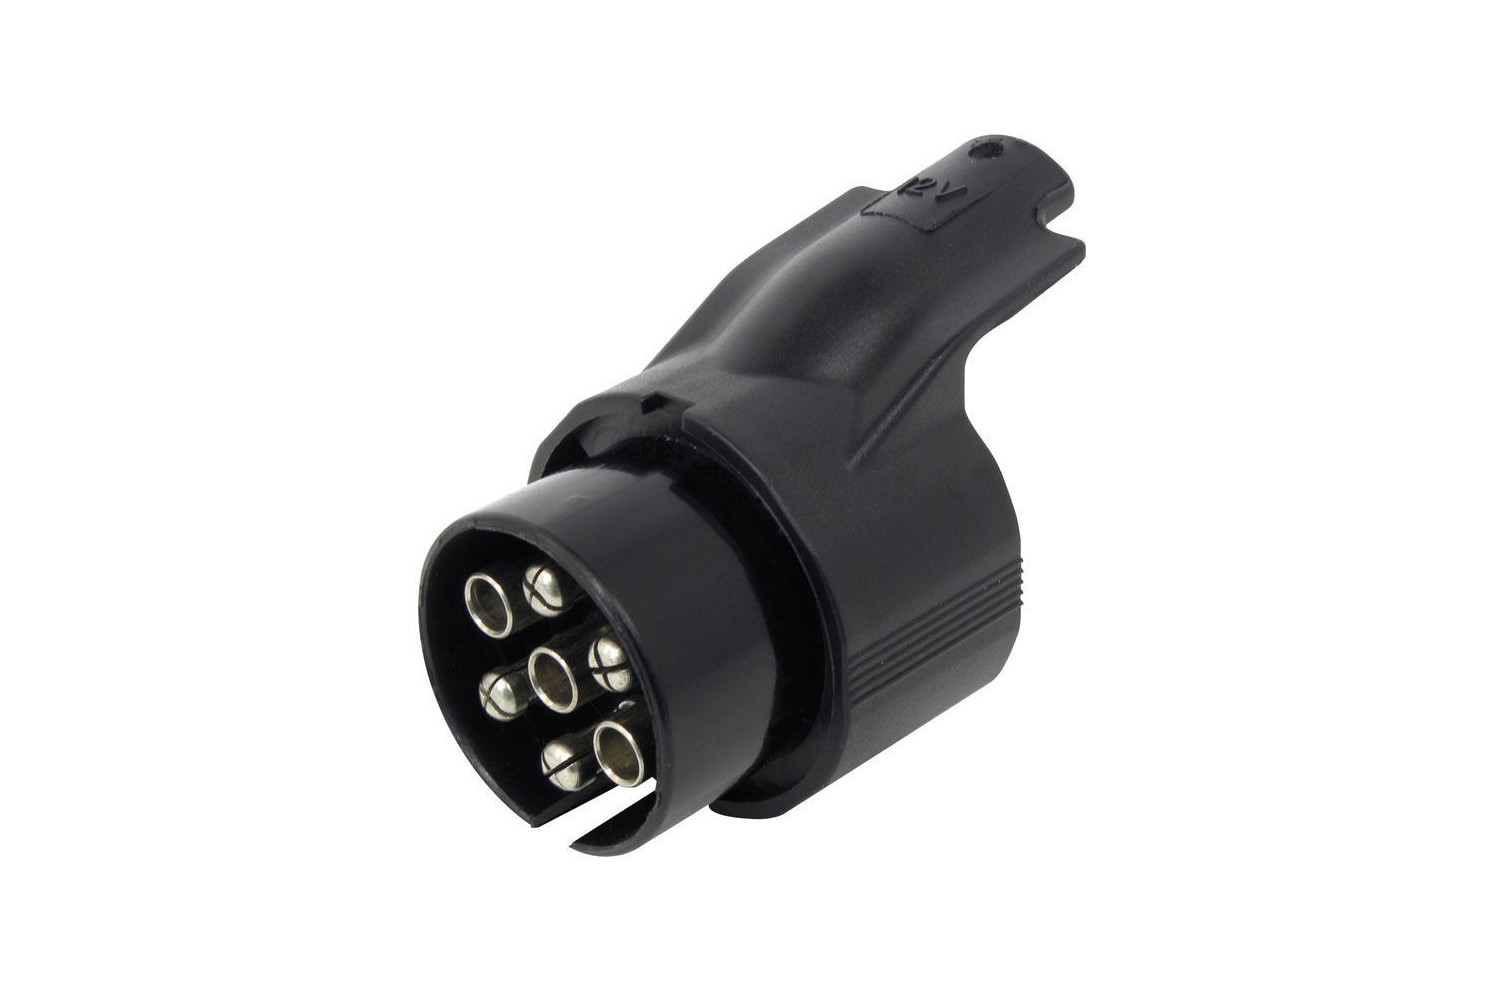 https://www.carparts-expert.com/images/stories/virtuemart/product/bcbc2acc-plug-adapter-for-13-pin-plug-to-7-pin-socket-on-the-car-1.jpg